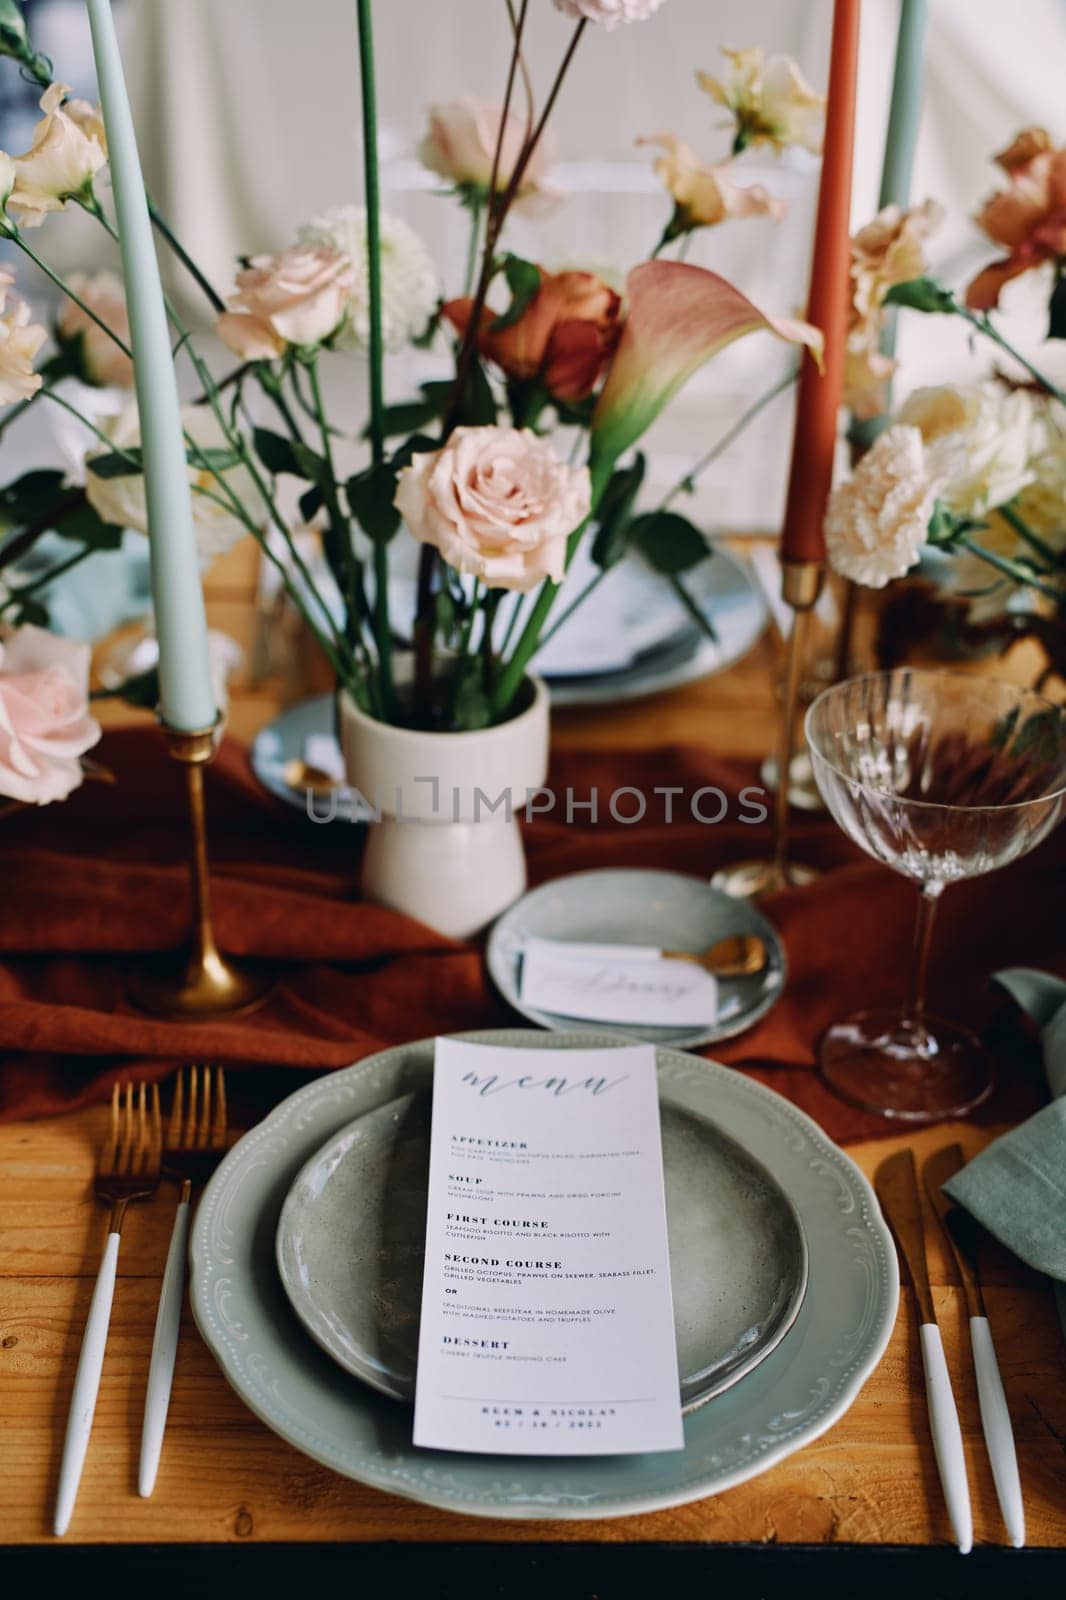 Festive menu lies on a plate on a served table near a bouquet of flowers. High quality photo